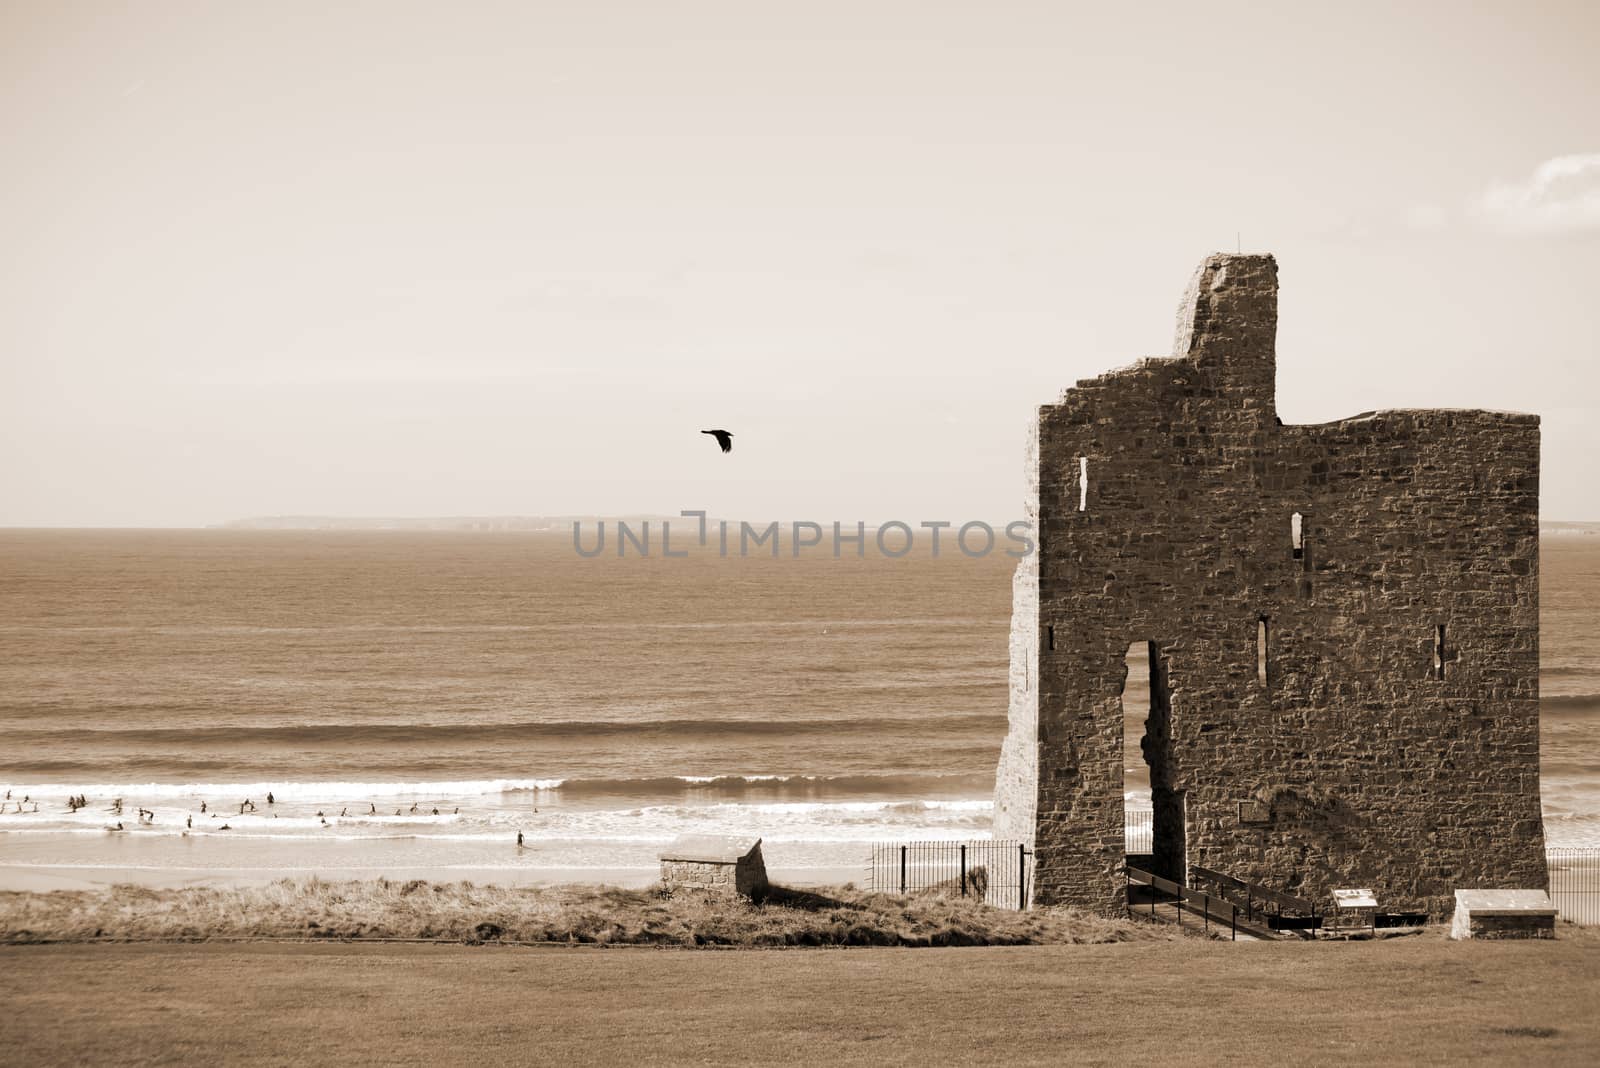 ballybunion castle ruins on the wild atlantic way in county kerry ireland as seen from the land